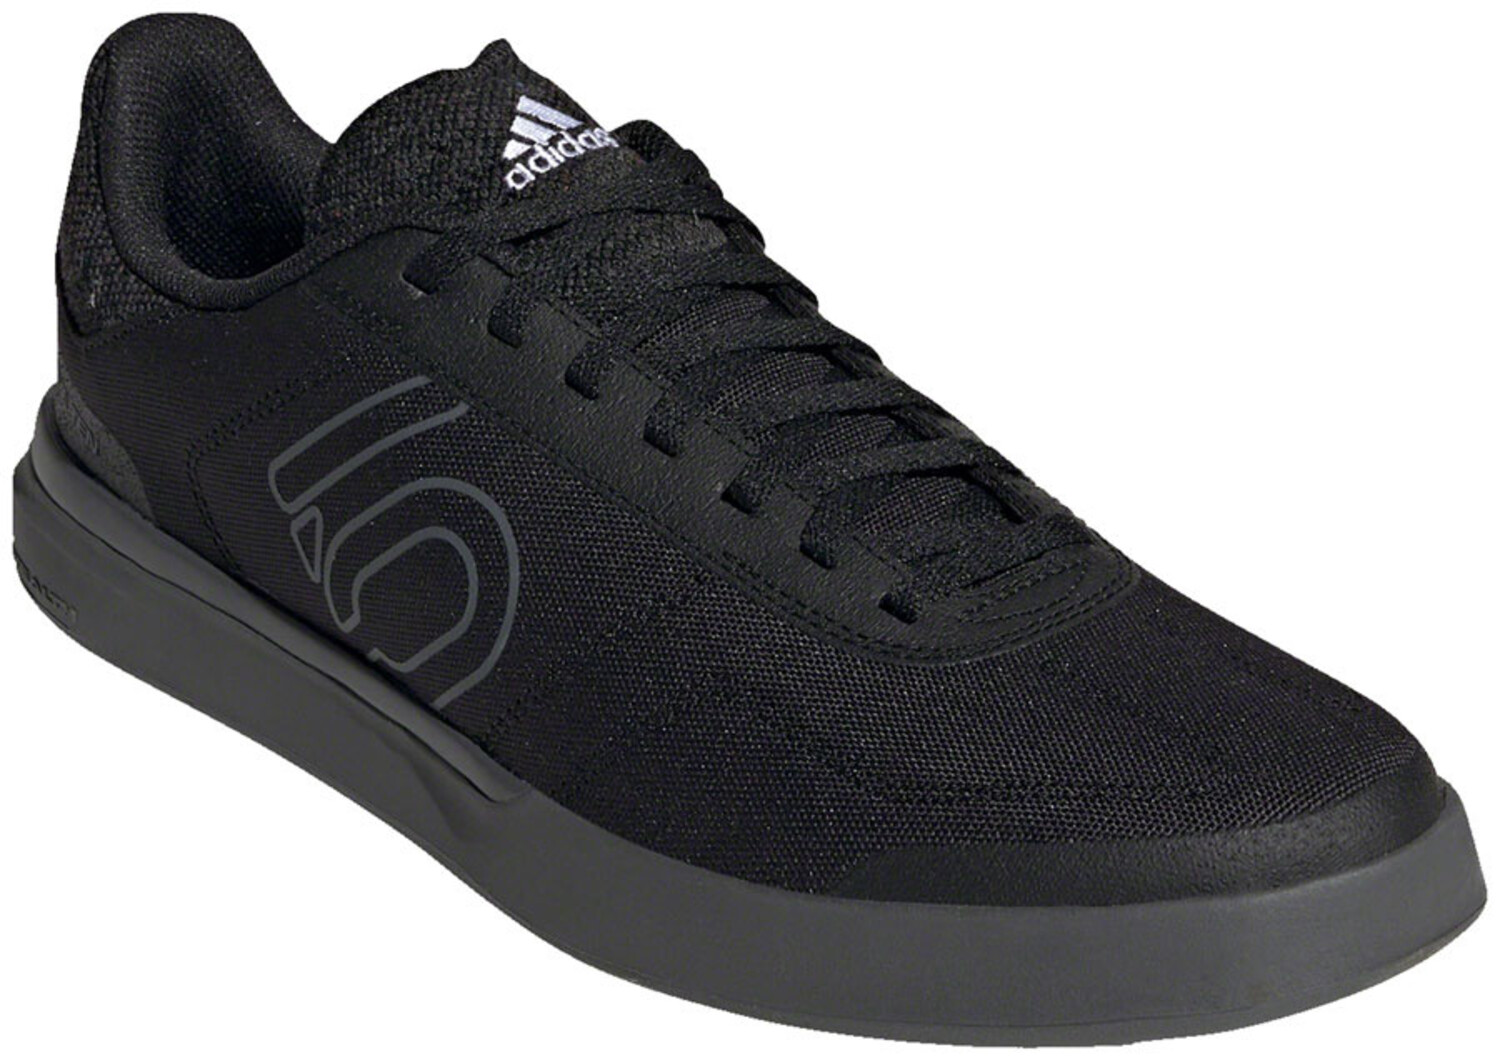 Sleuth DLX Canvas Flat Shoes - Men's - Dream Cyclery